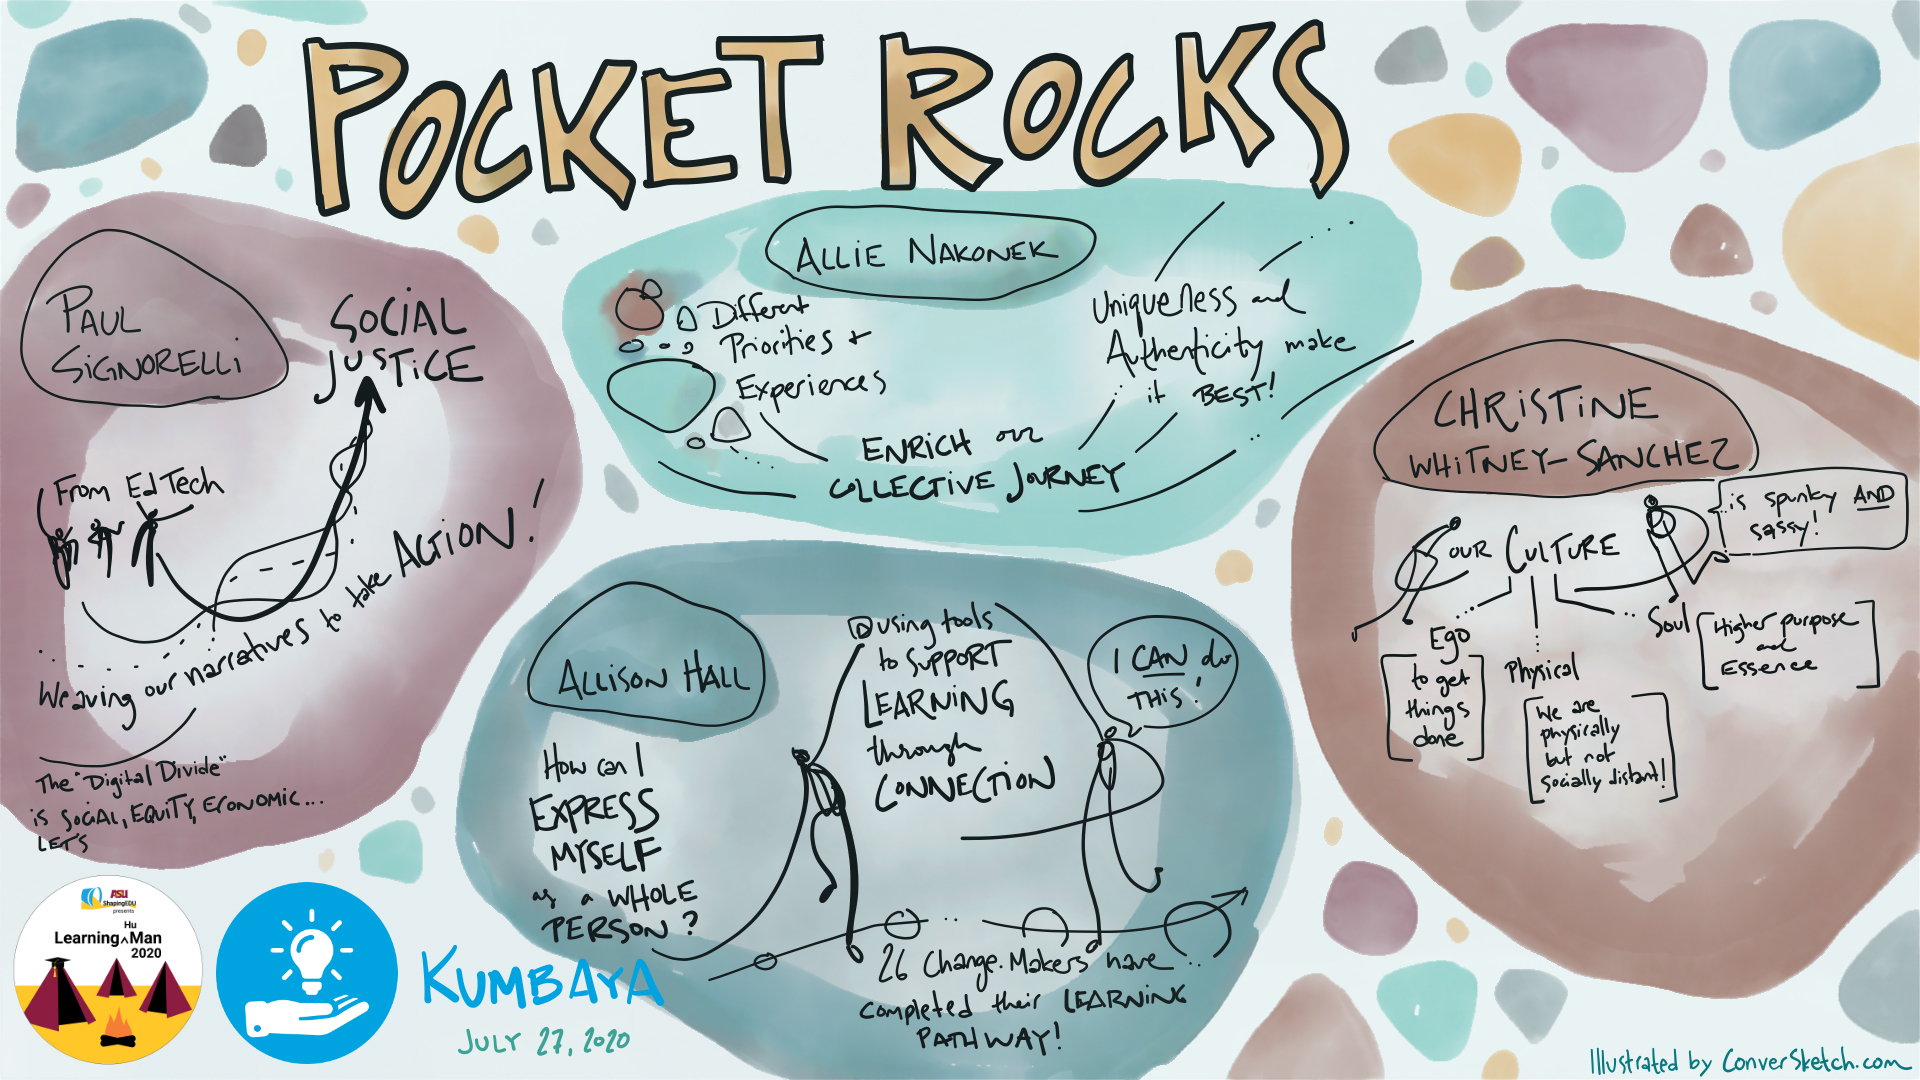 Pocket Rocks (Lessons Learned) at Learning(Hu)Man